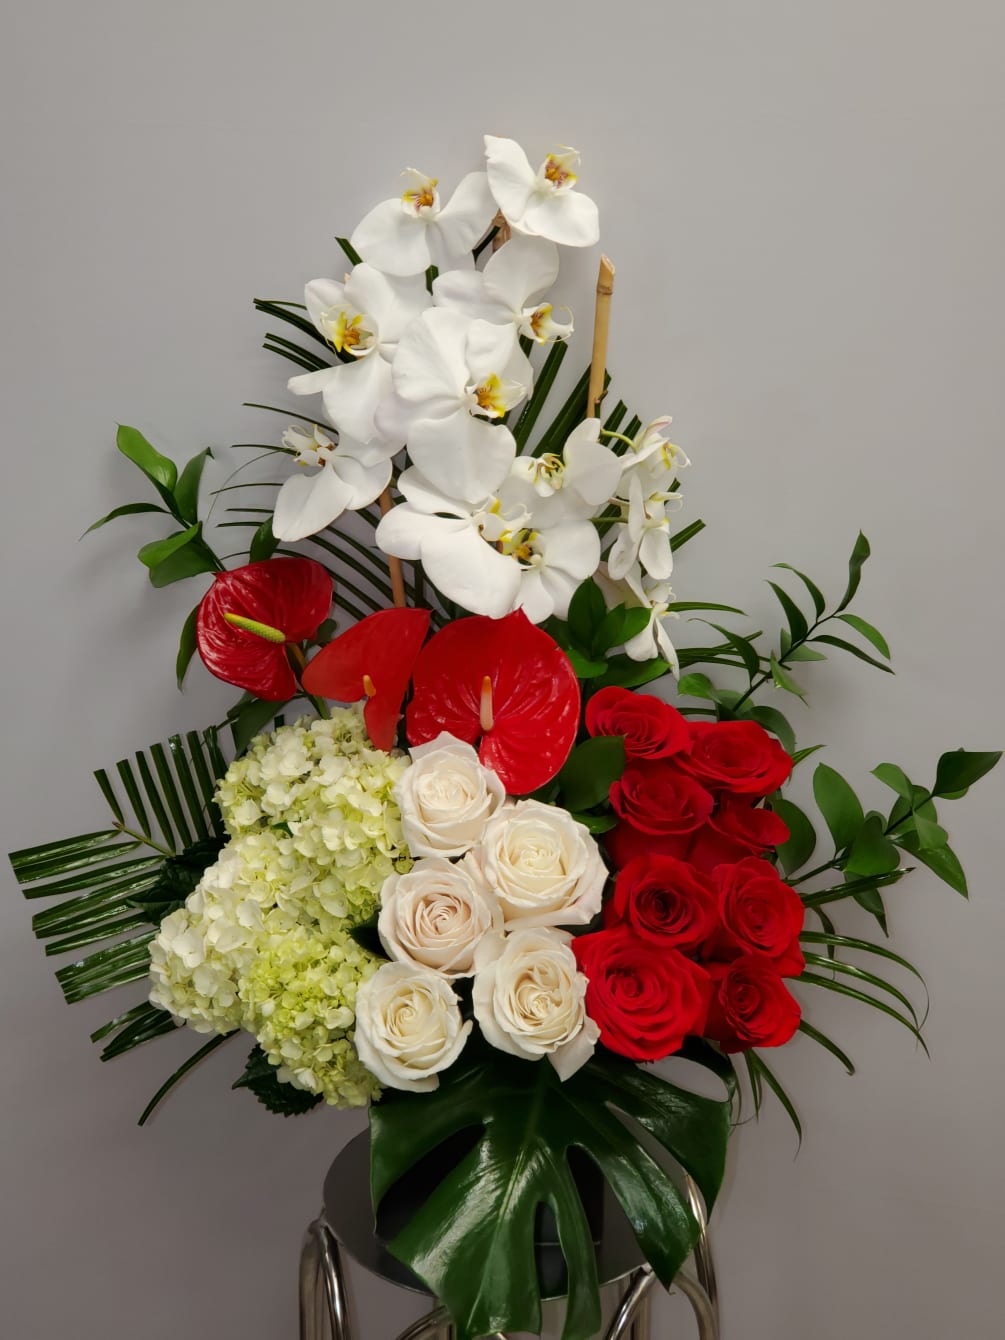 Tropical romance is a beautiful romantic arrangement with orchid, roses, hydrangea and